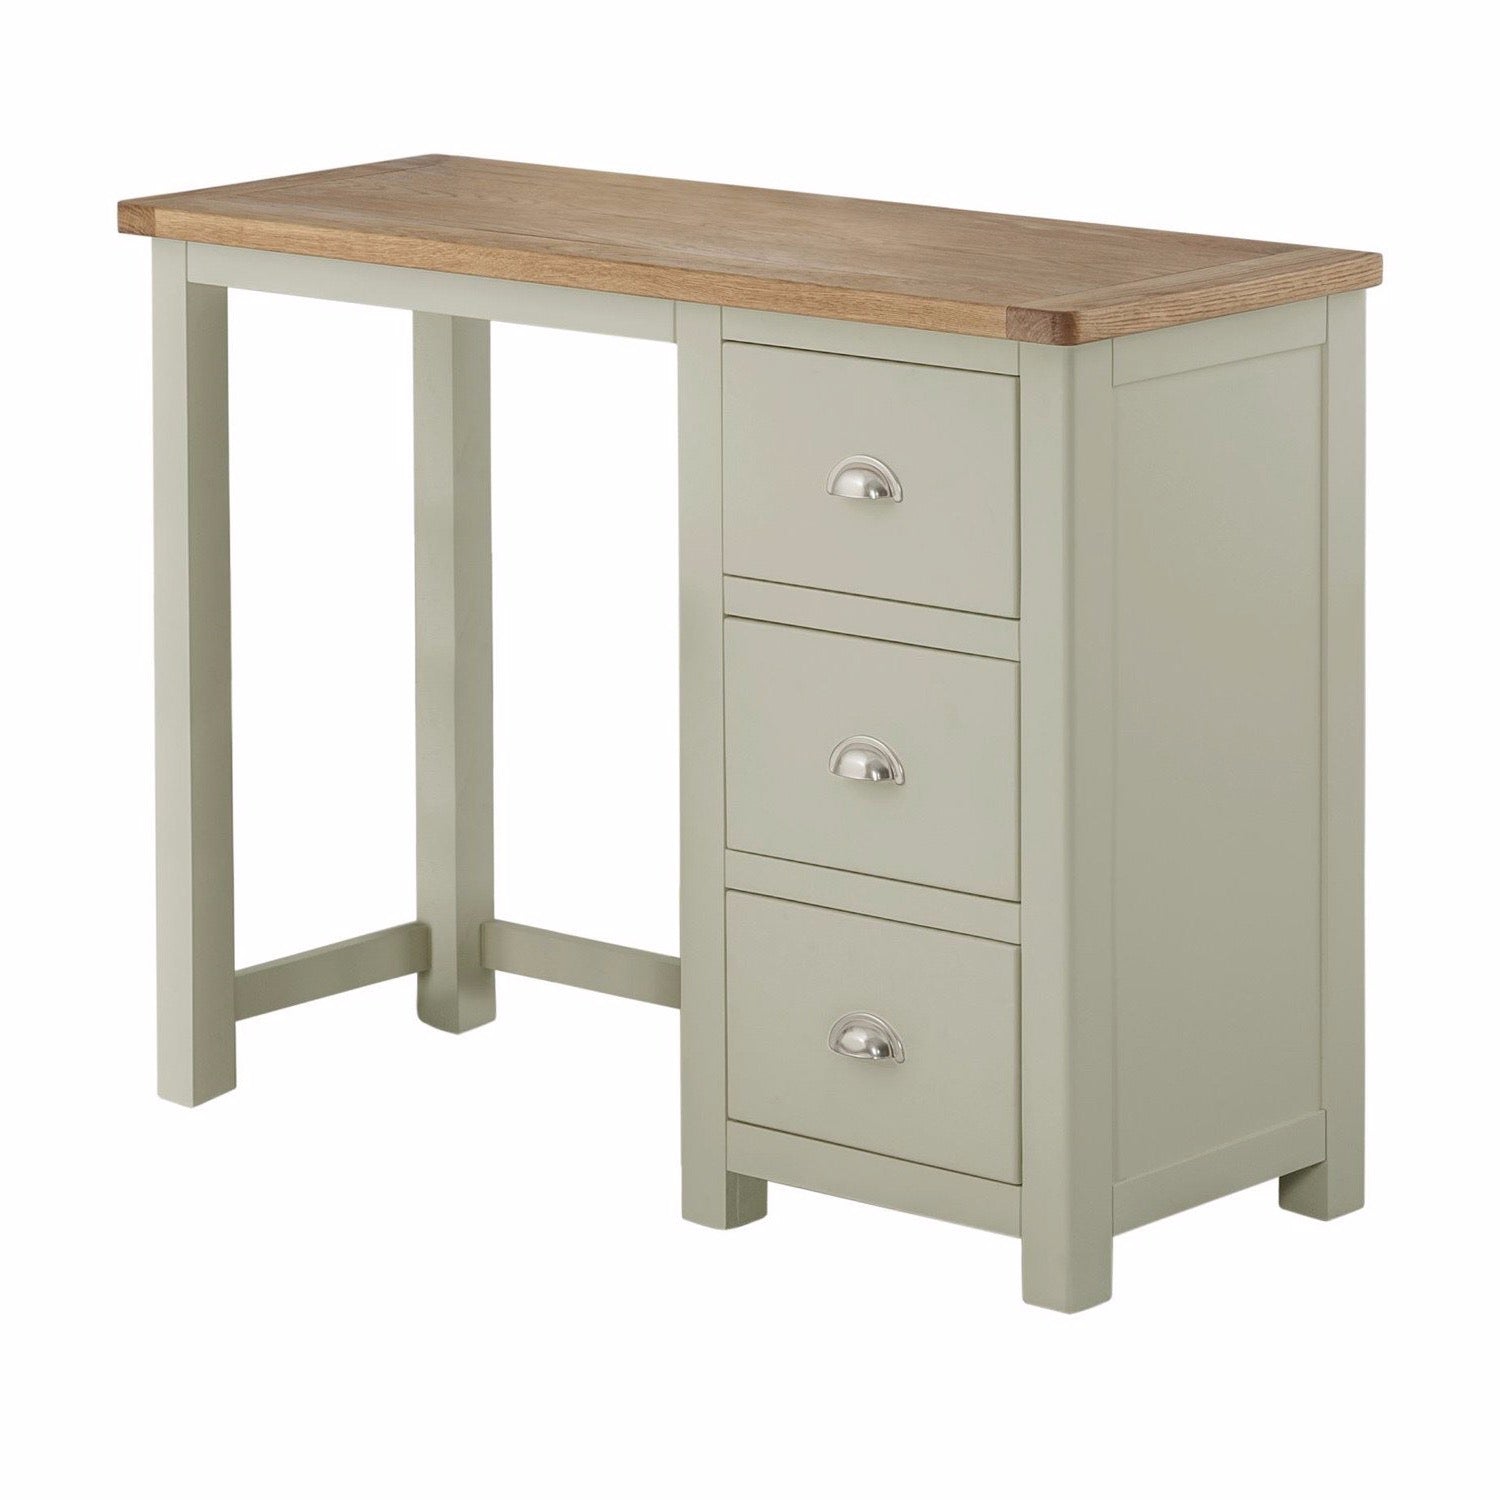 Todenham Oak & Painted Dressing Table - Better Furniture Norwich & Great Yarmouth